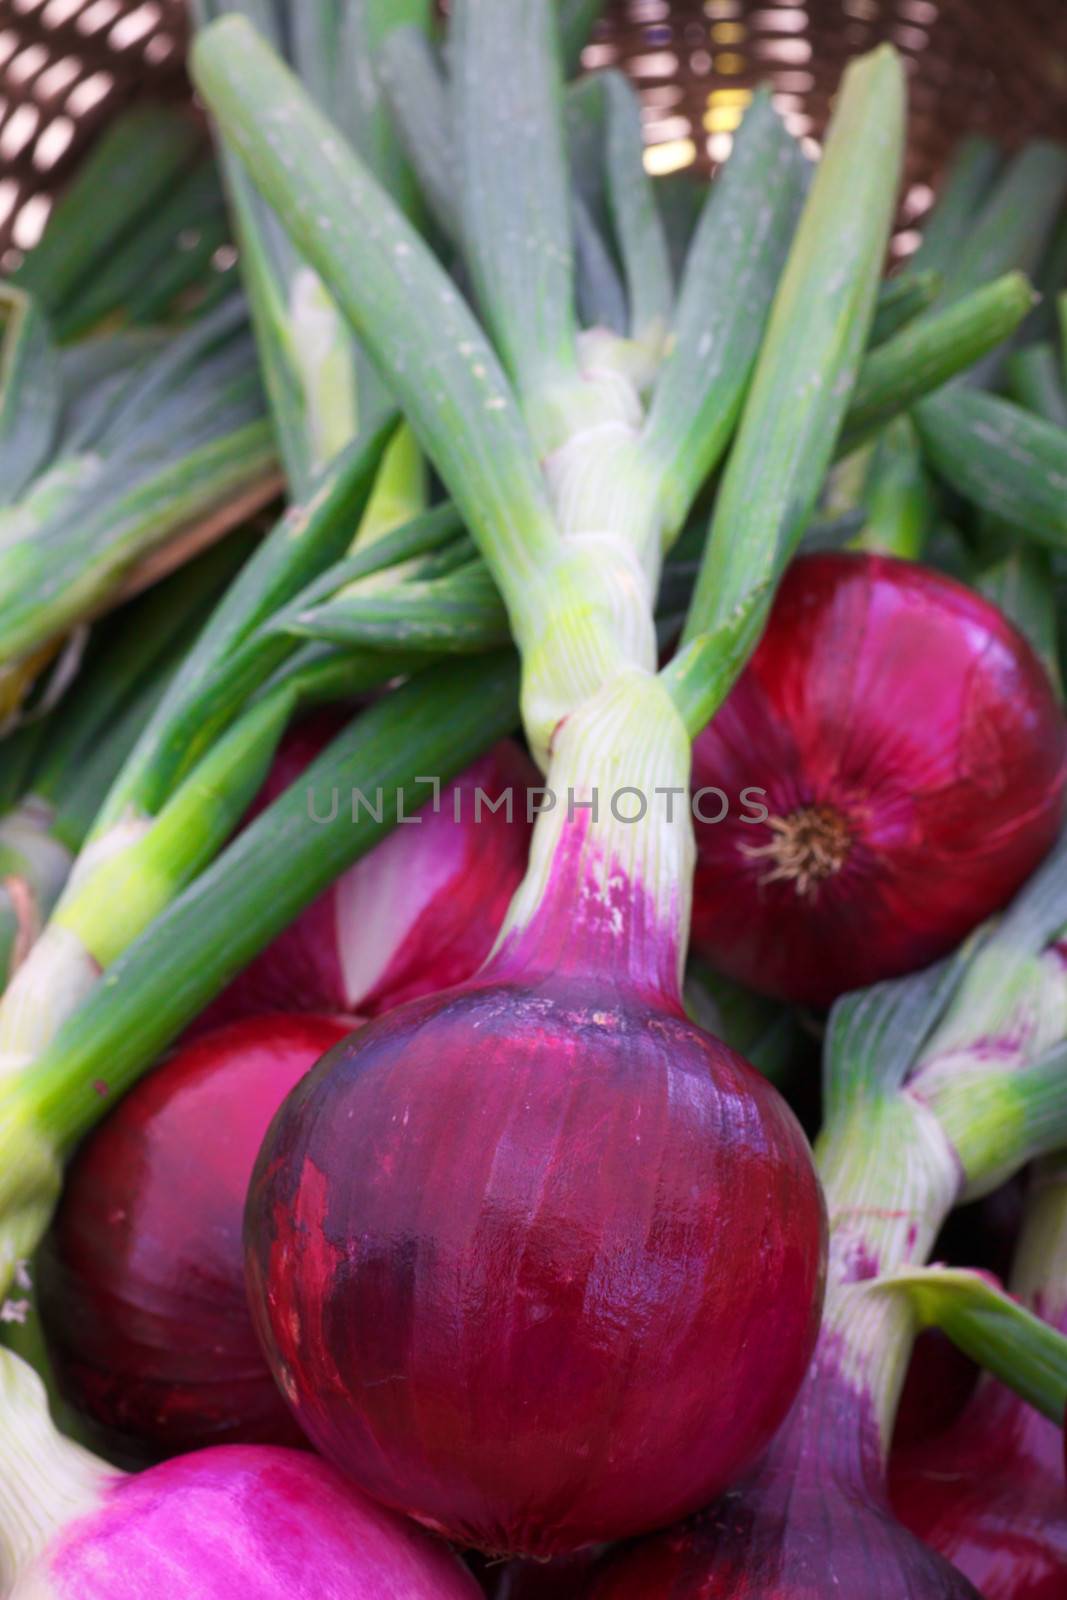 Red onions by bobkeenan